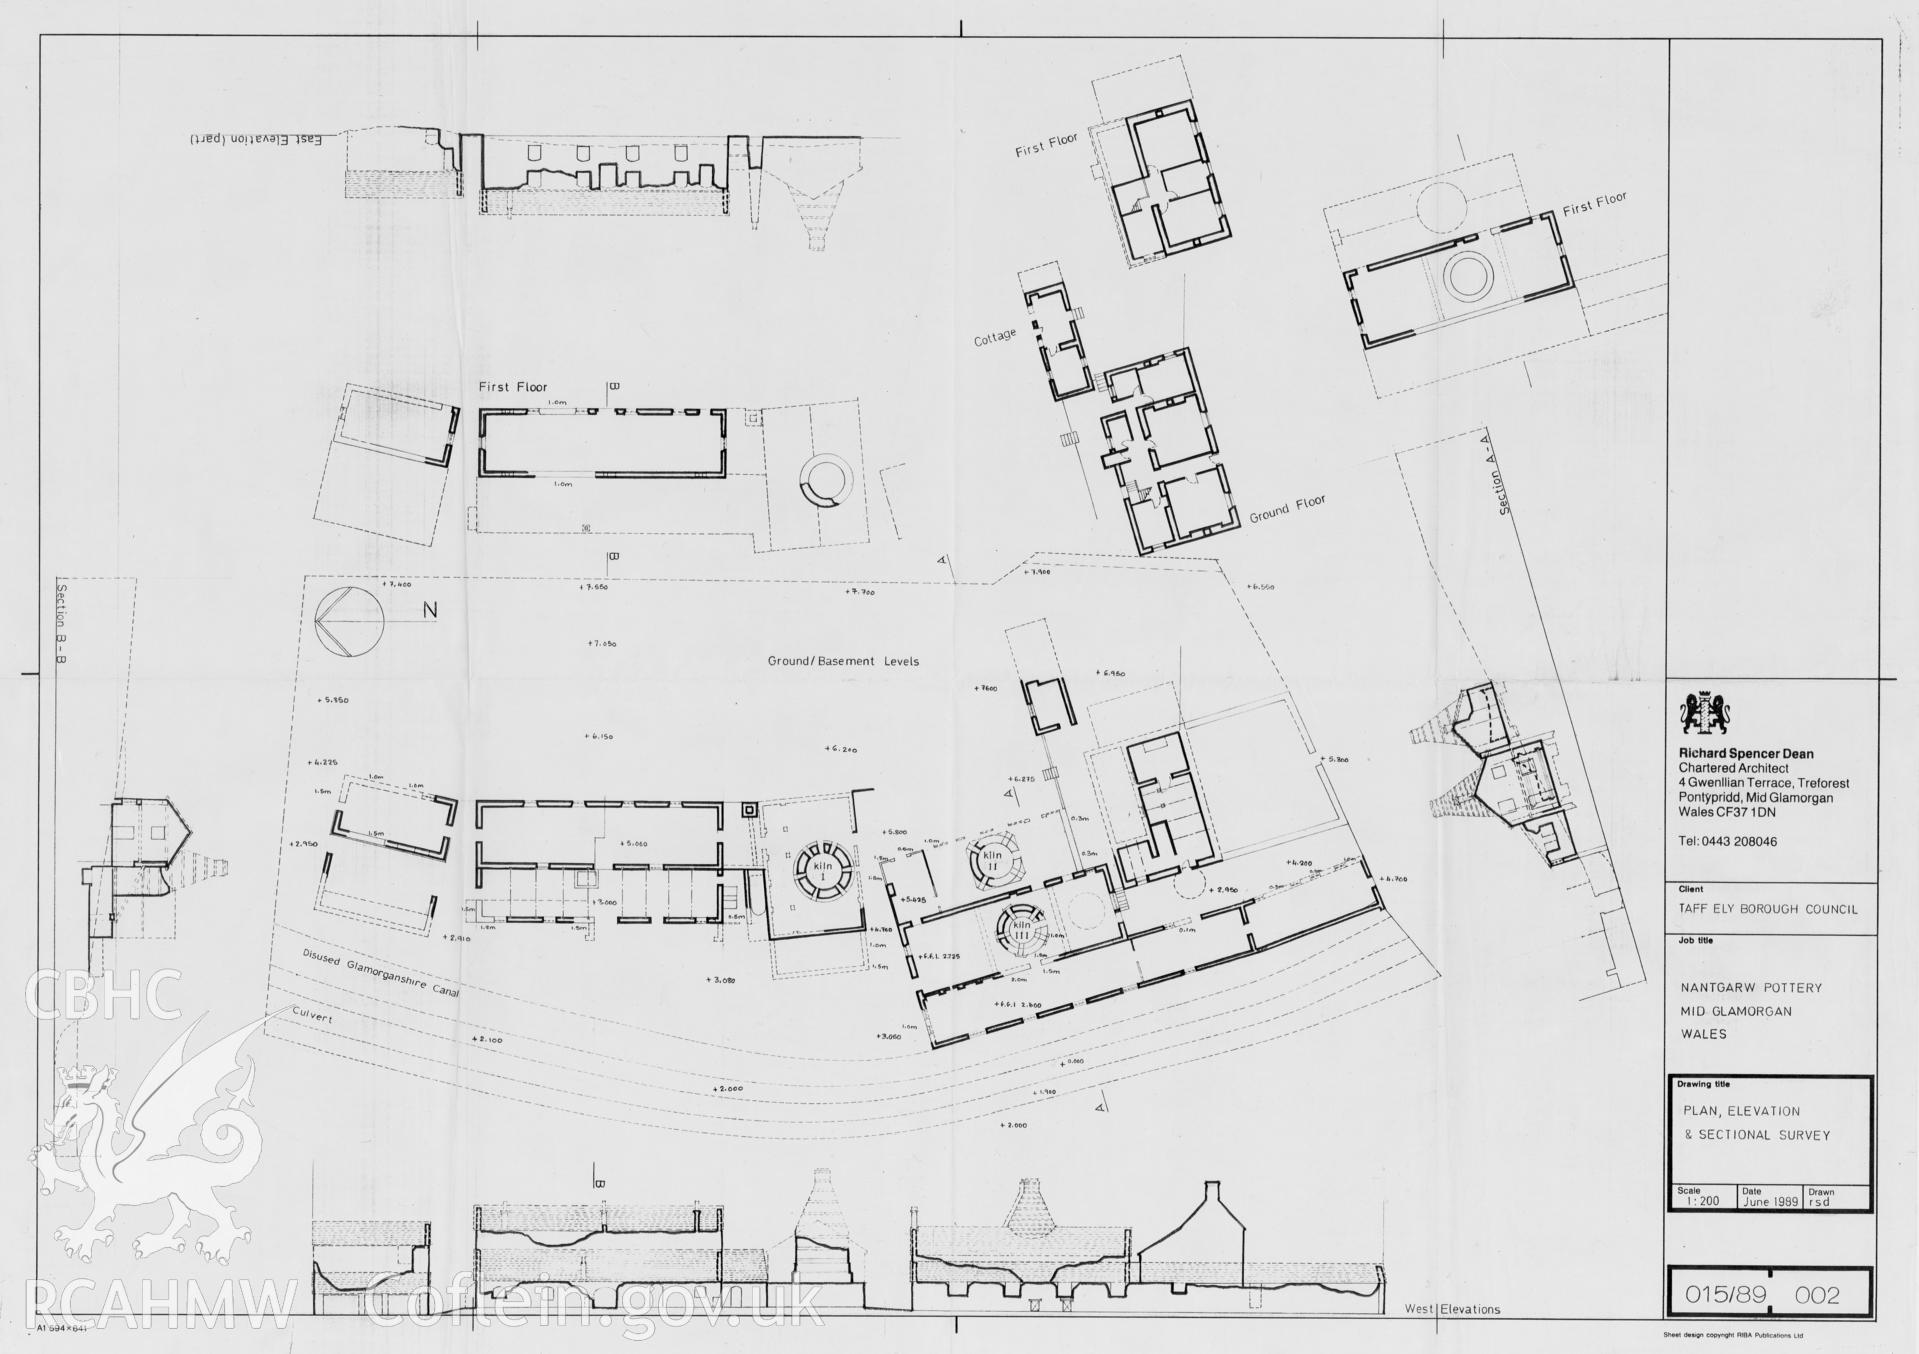 Digital copy of a measured dyeline drawing showing plan, elevation and sectional survey of Nantgarw Pottery, produced by Richard Spencer Dean for Taff Ely Borough Council.